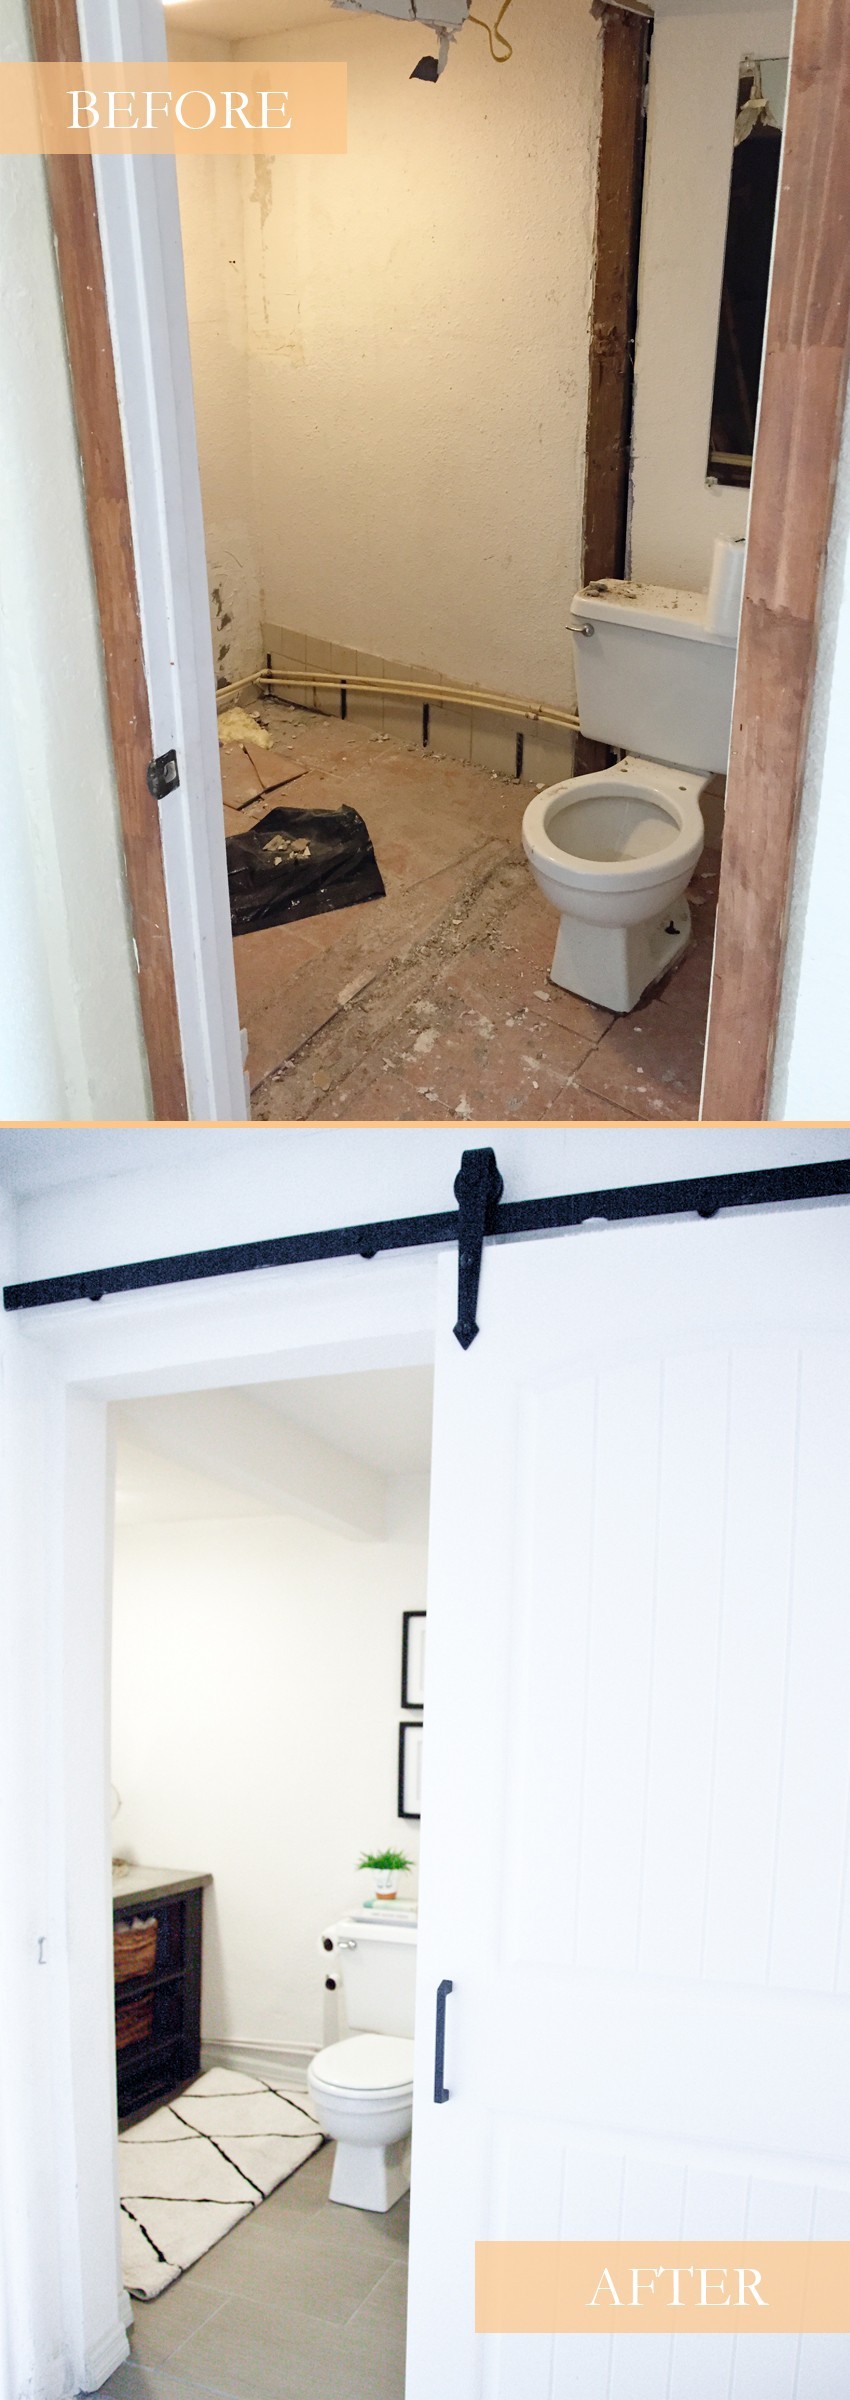 Our light and bright simple studio bathroom remodel: A Before and After. Taking it from a big mess to a clean, modern bathroom space.